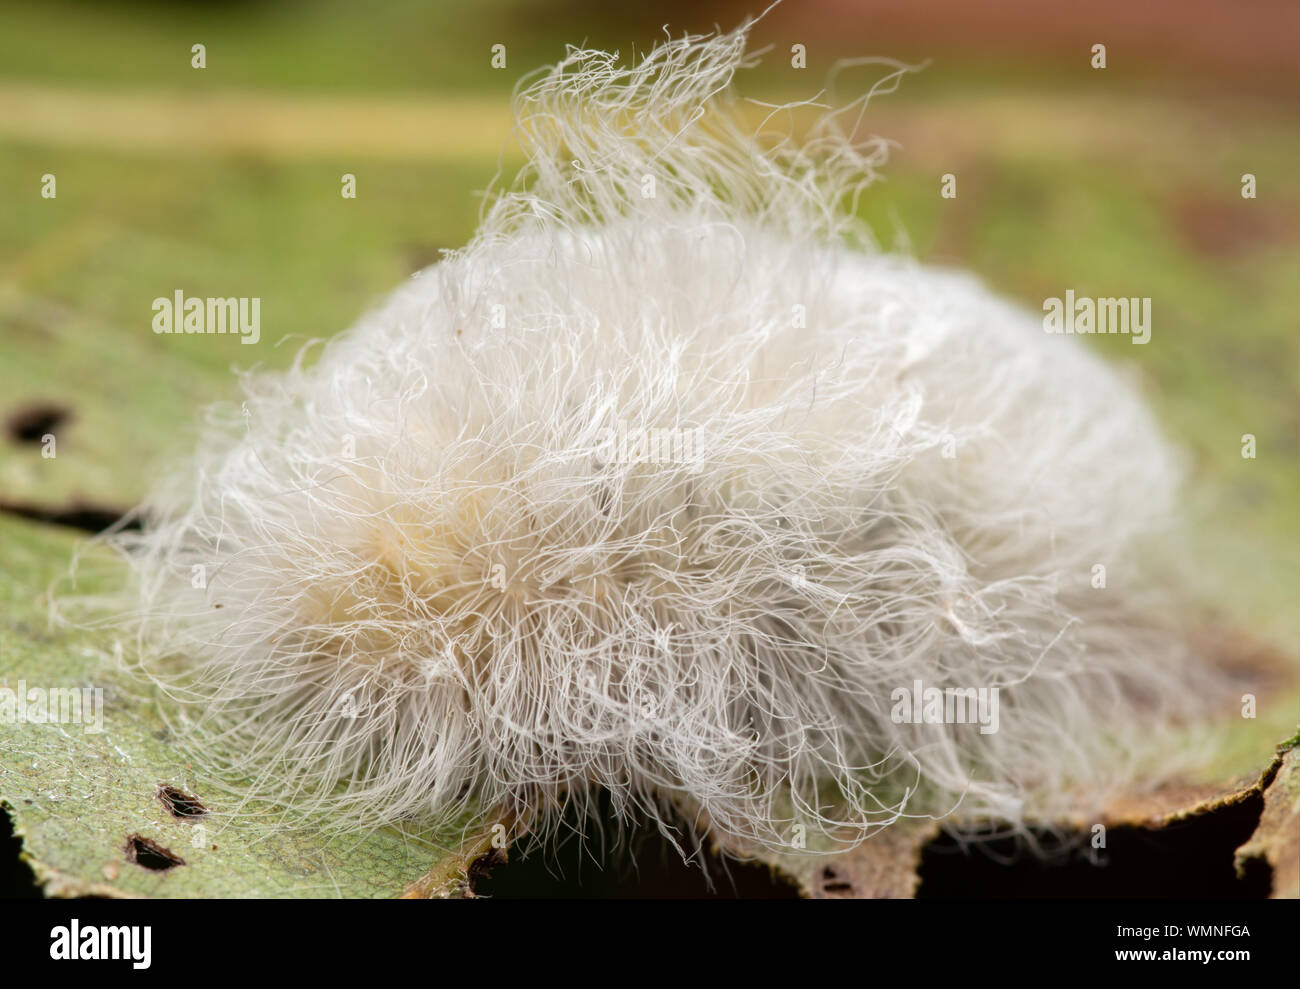 Megalopyge crispata, Black-waved Flannel Moth caterpillar that hides its venomous spines under the innocent looking white fluffy hairs, on an Oak leaf Stock Photo